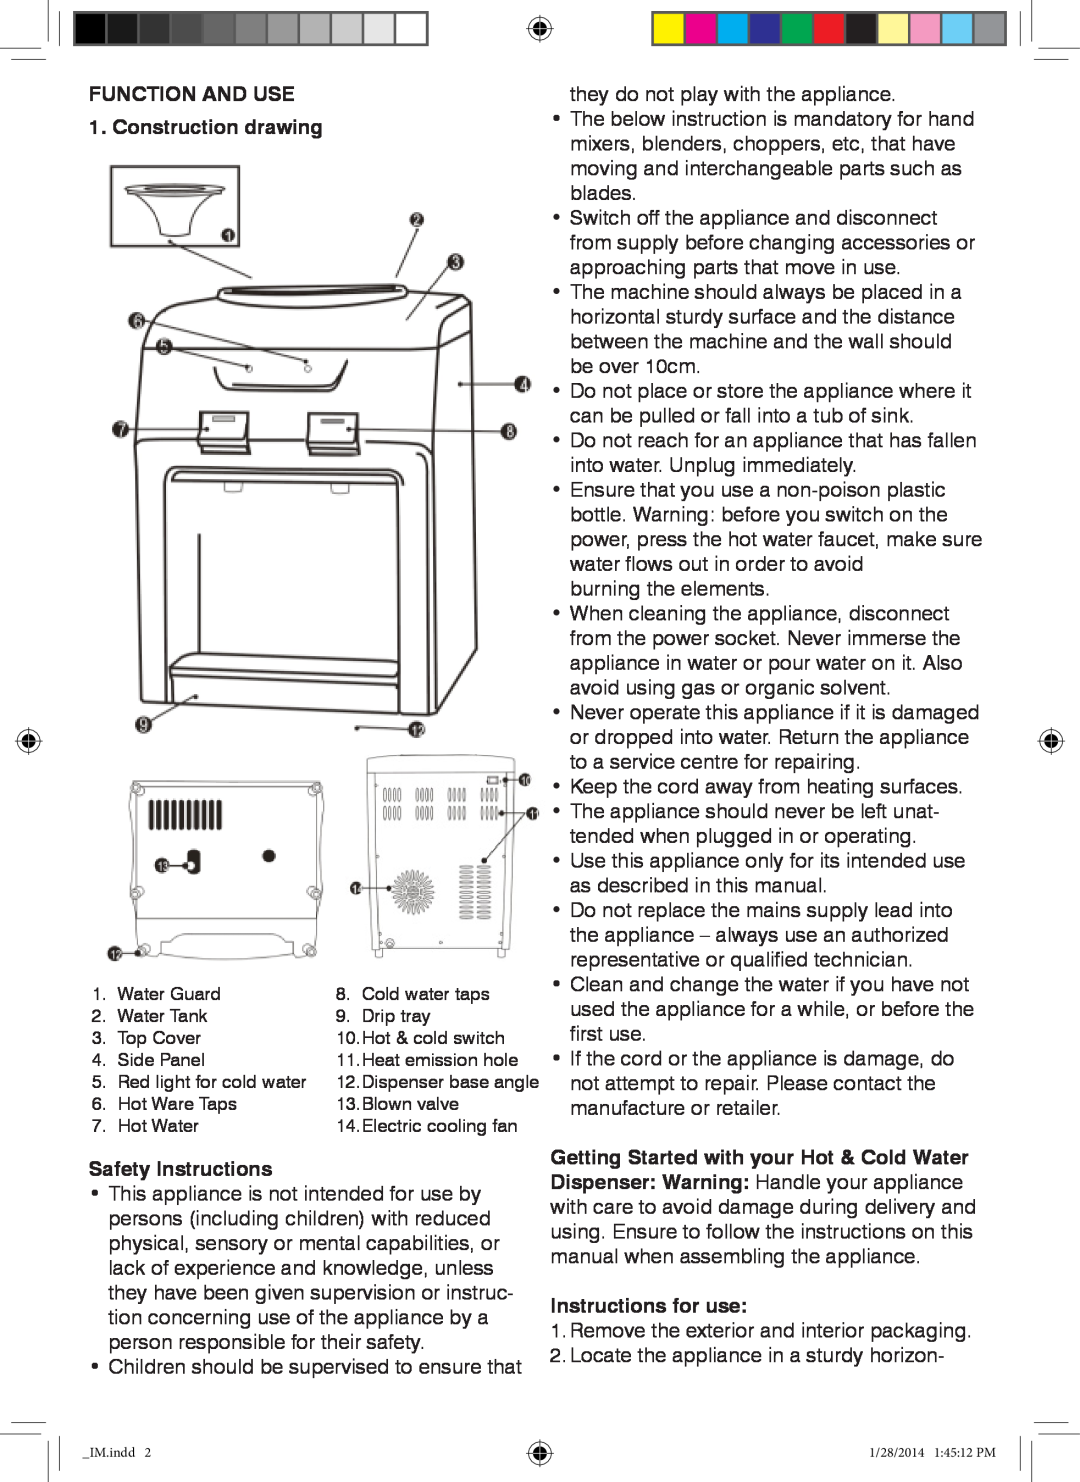 Mellerware 30100 75 - 550 W manual FUNCTION AND USE 1. Construction drawing, Safety Instructions, Instructions for use 